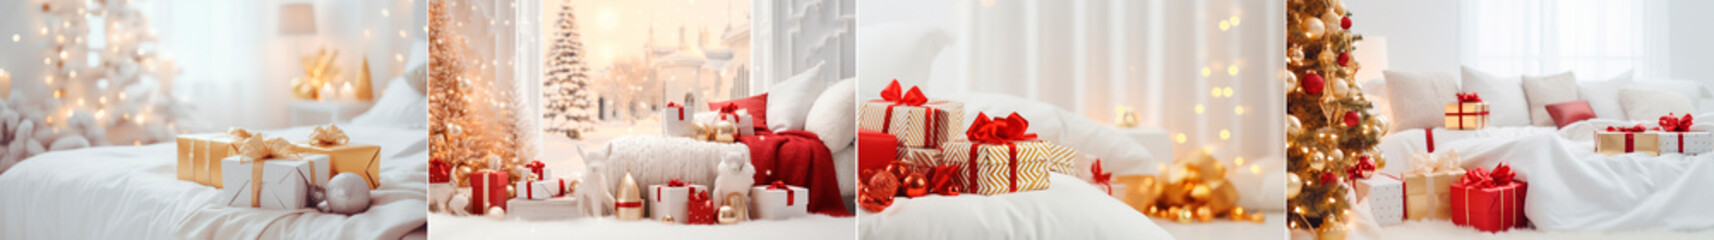 Create a festive Christmas atmosphere in your bedroom with a red, gold and white themed tree. Decorate your tree with beautiful ornaments and lights to bring the holiday spirit into your room.